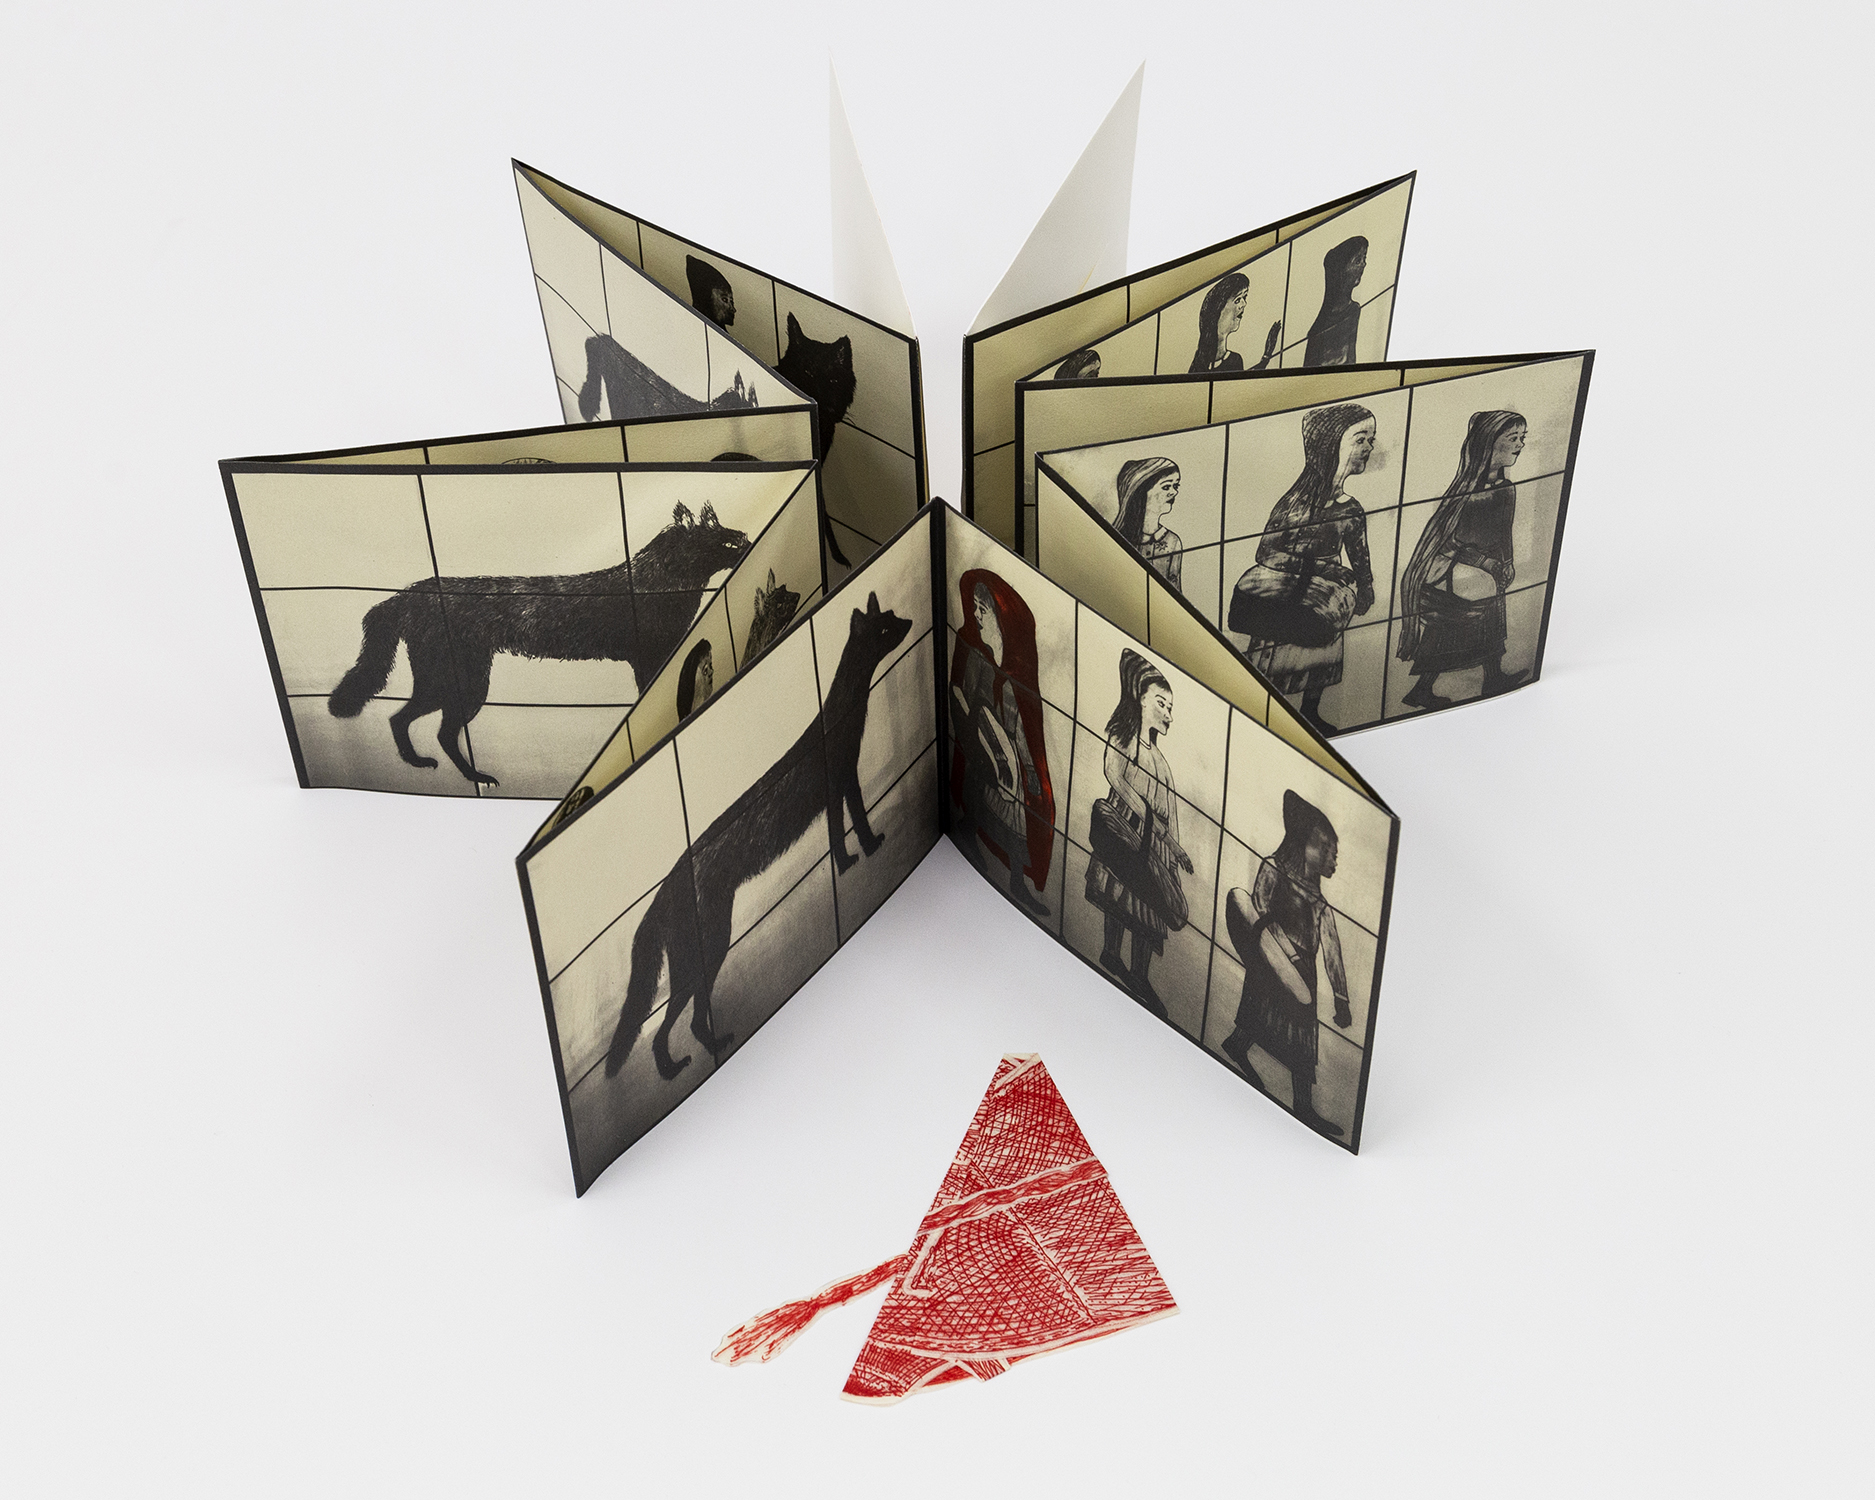 Companion, 2000, Book of accordian-folded photolithographs on mold-made paper, 6 3/4 x 10 1/2 inches (17.1 x 26.7 cm) unfolded, Edition of 100